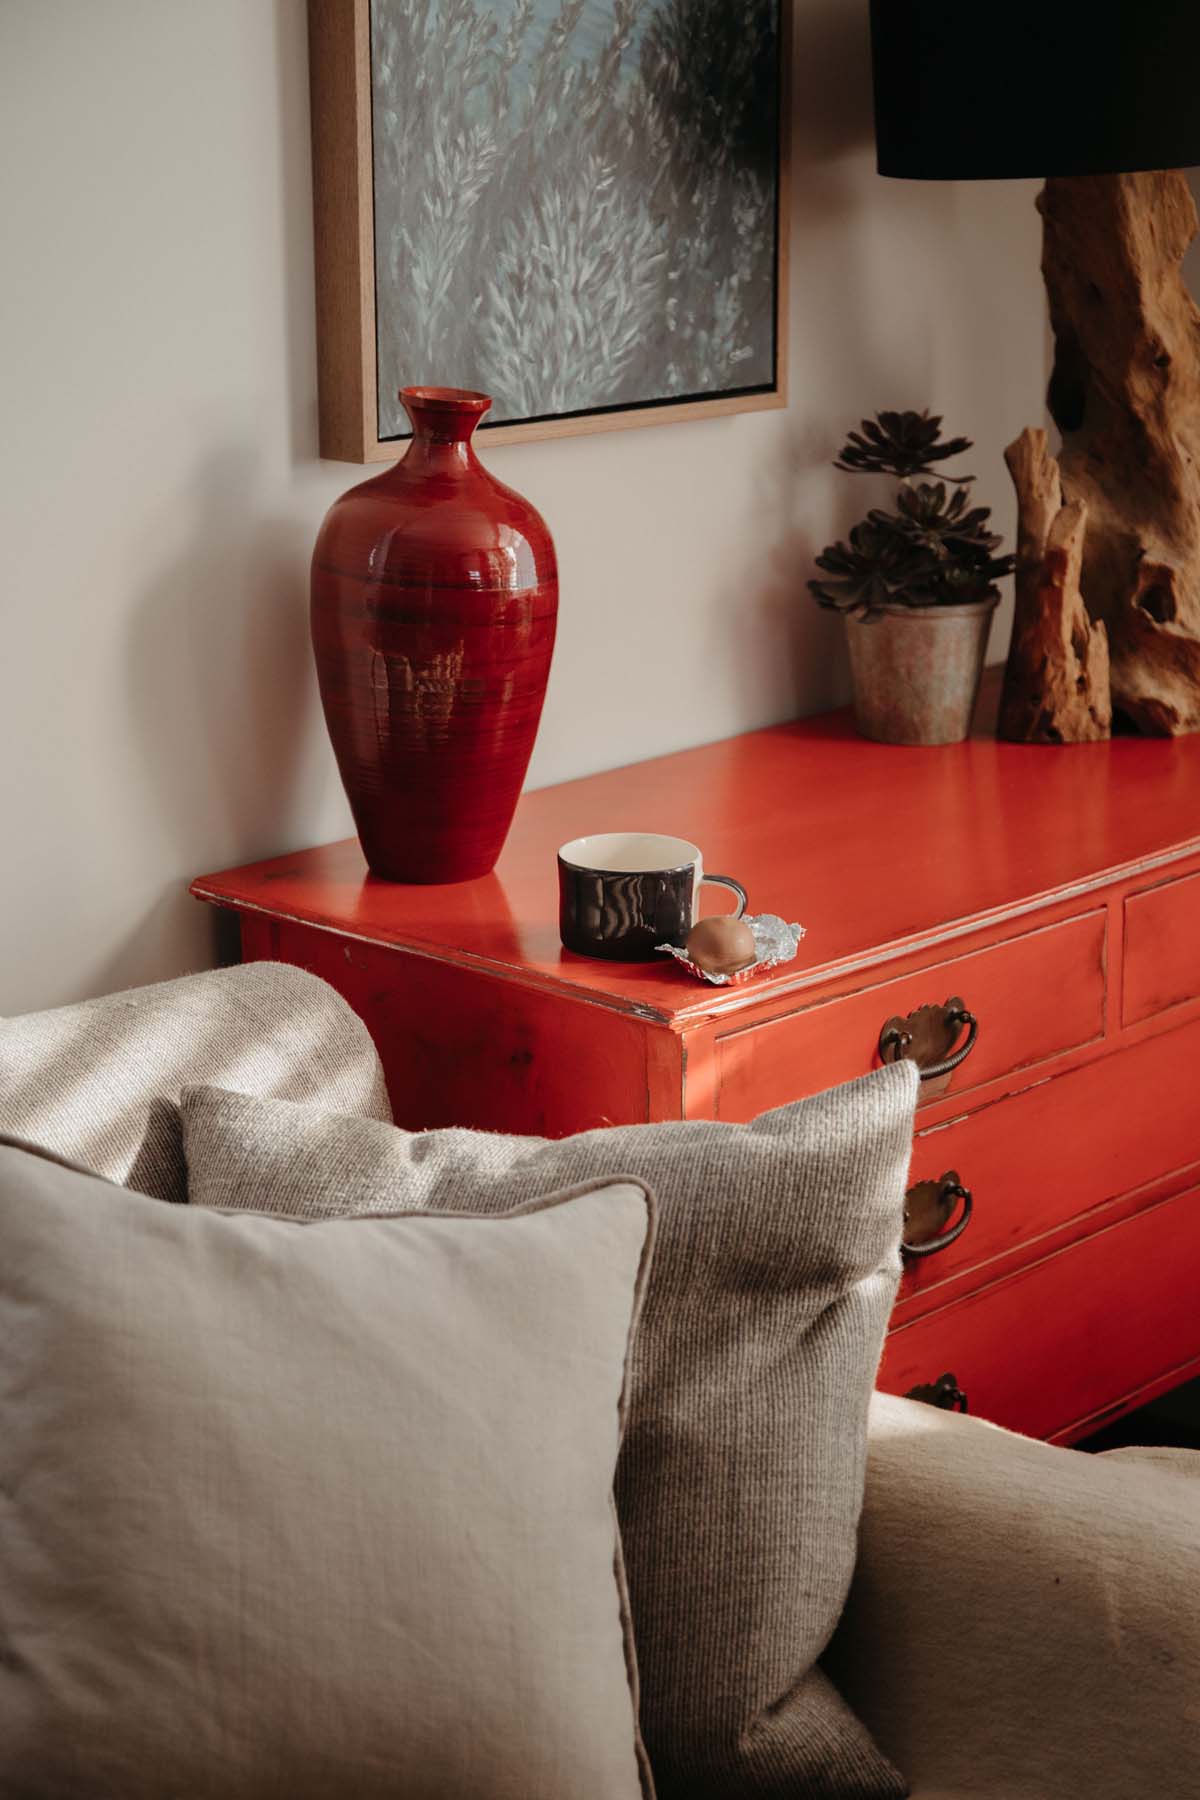 Red vase on a red cabinet